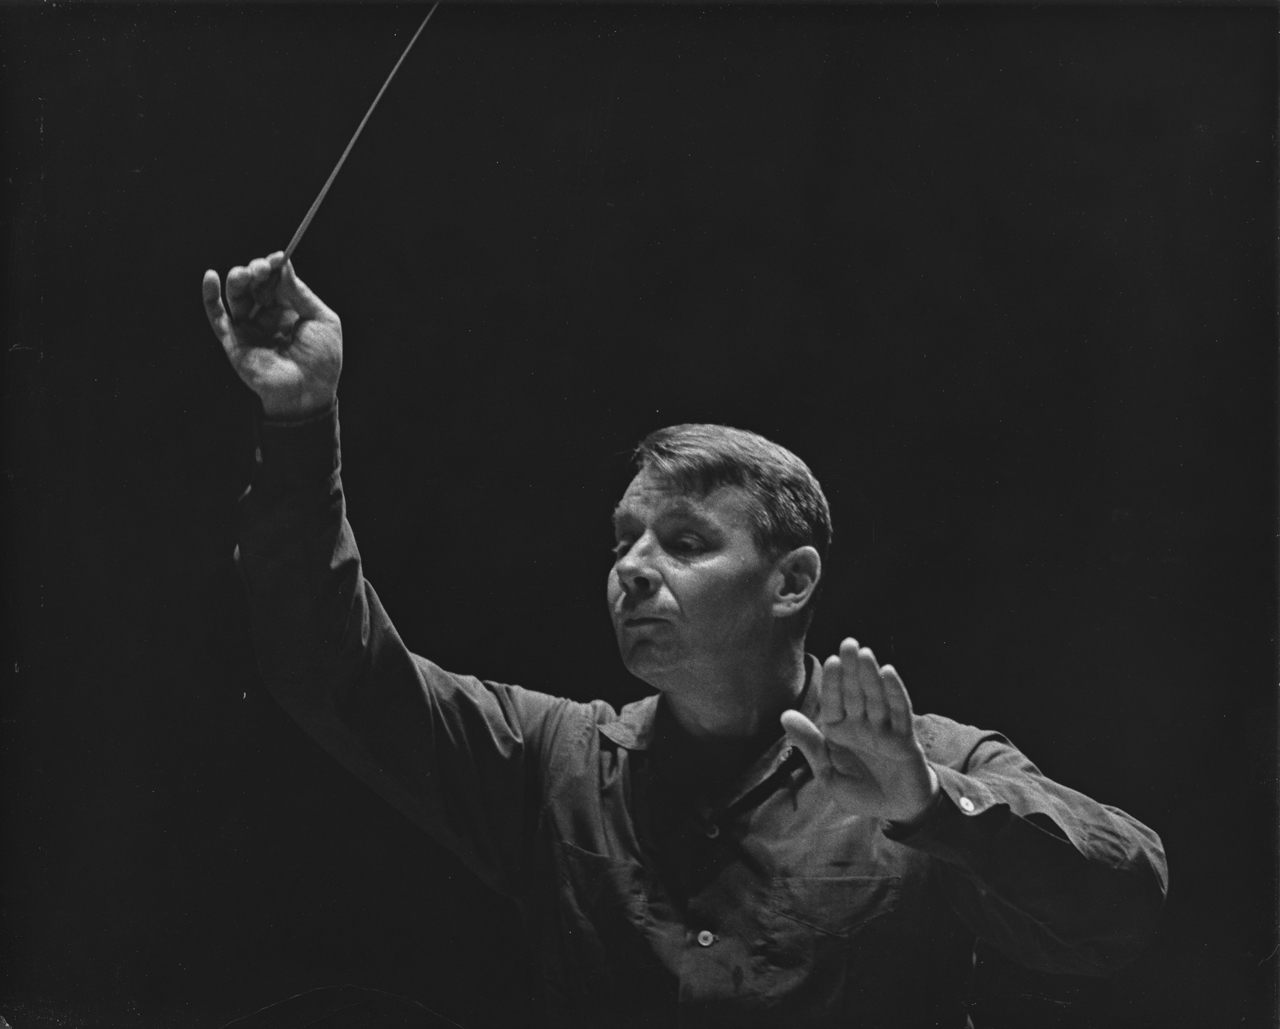 Shaw conducting in his famous blue shirt, unknown date/photographer